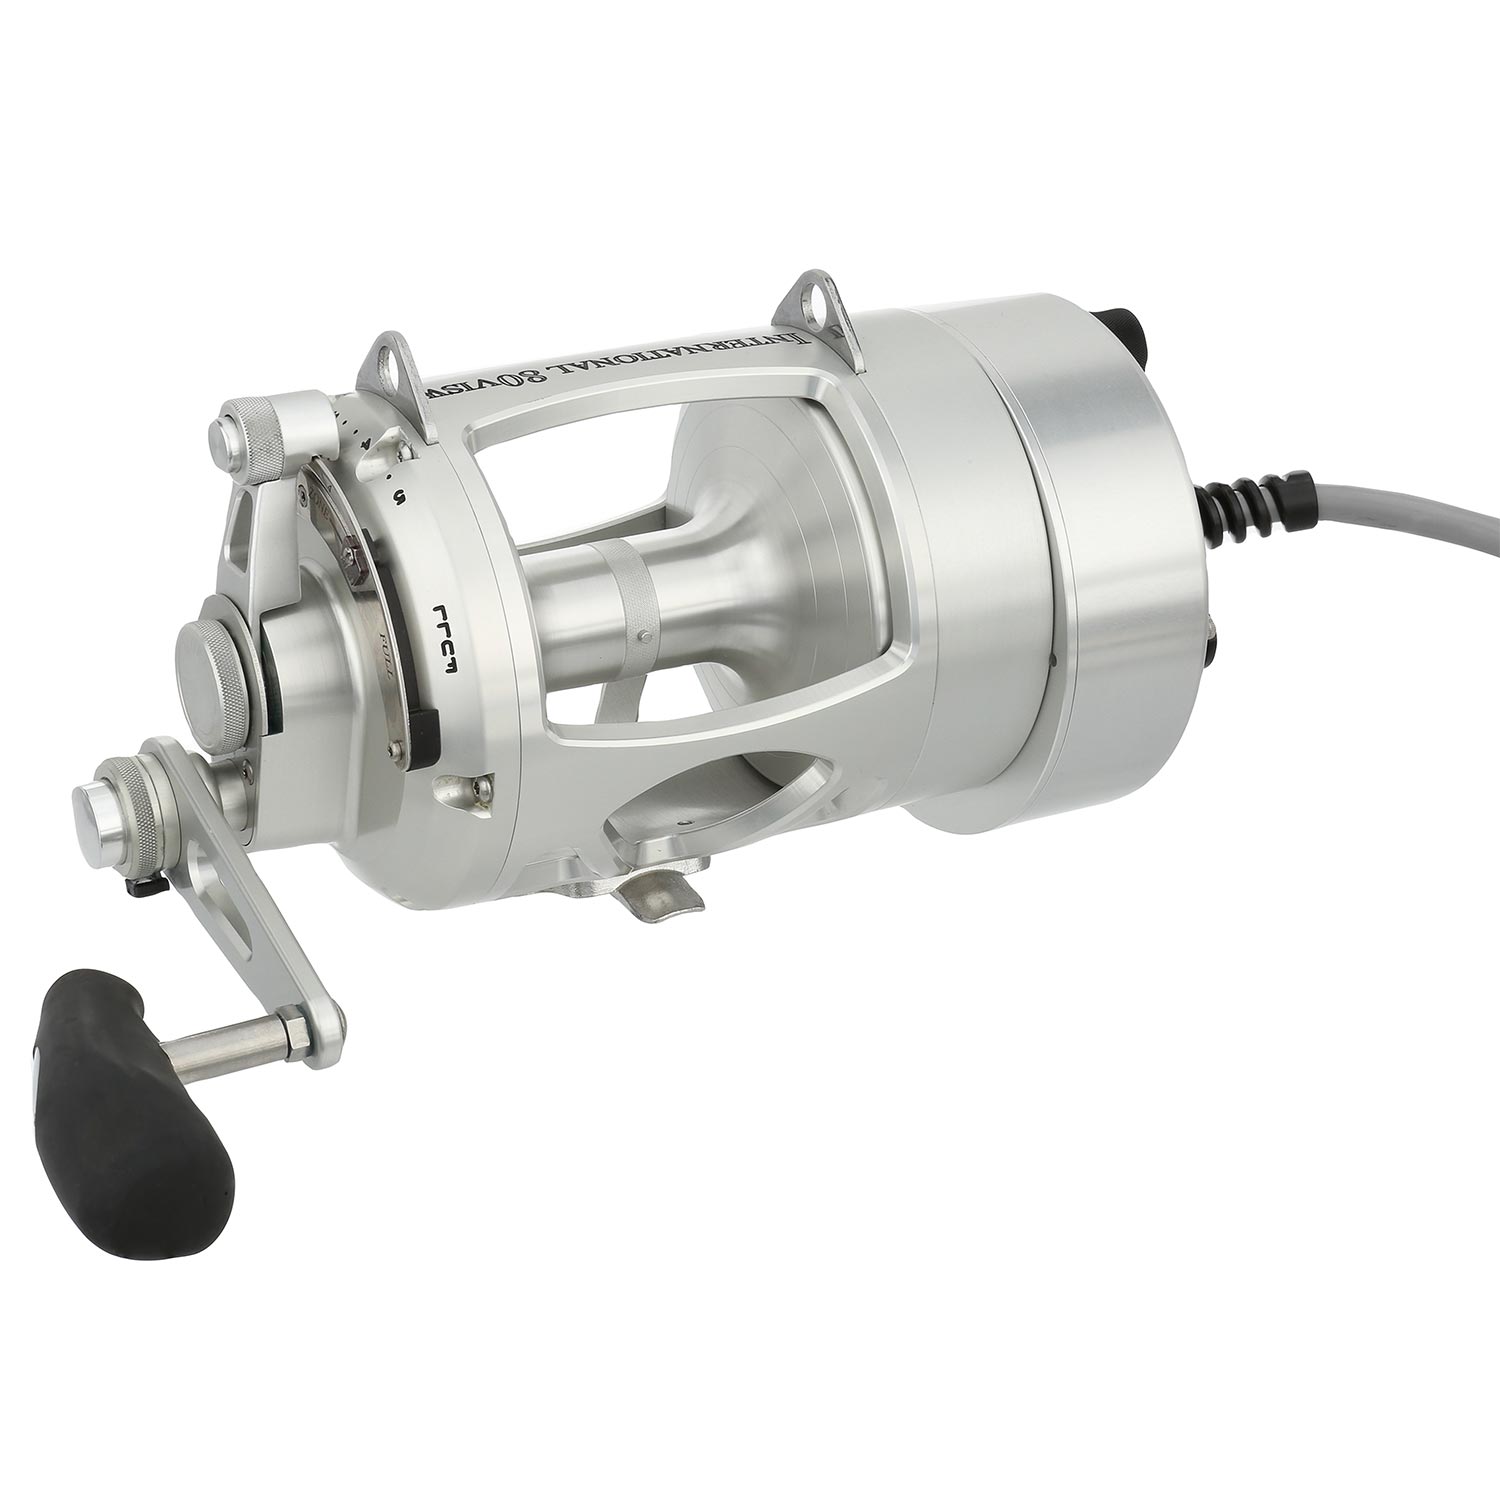 Hooker electric reels - boat parts - by owner - marine sale